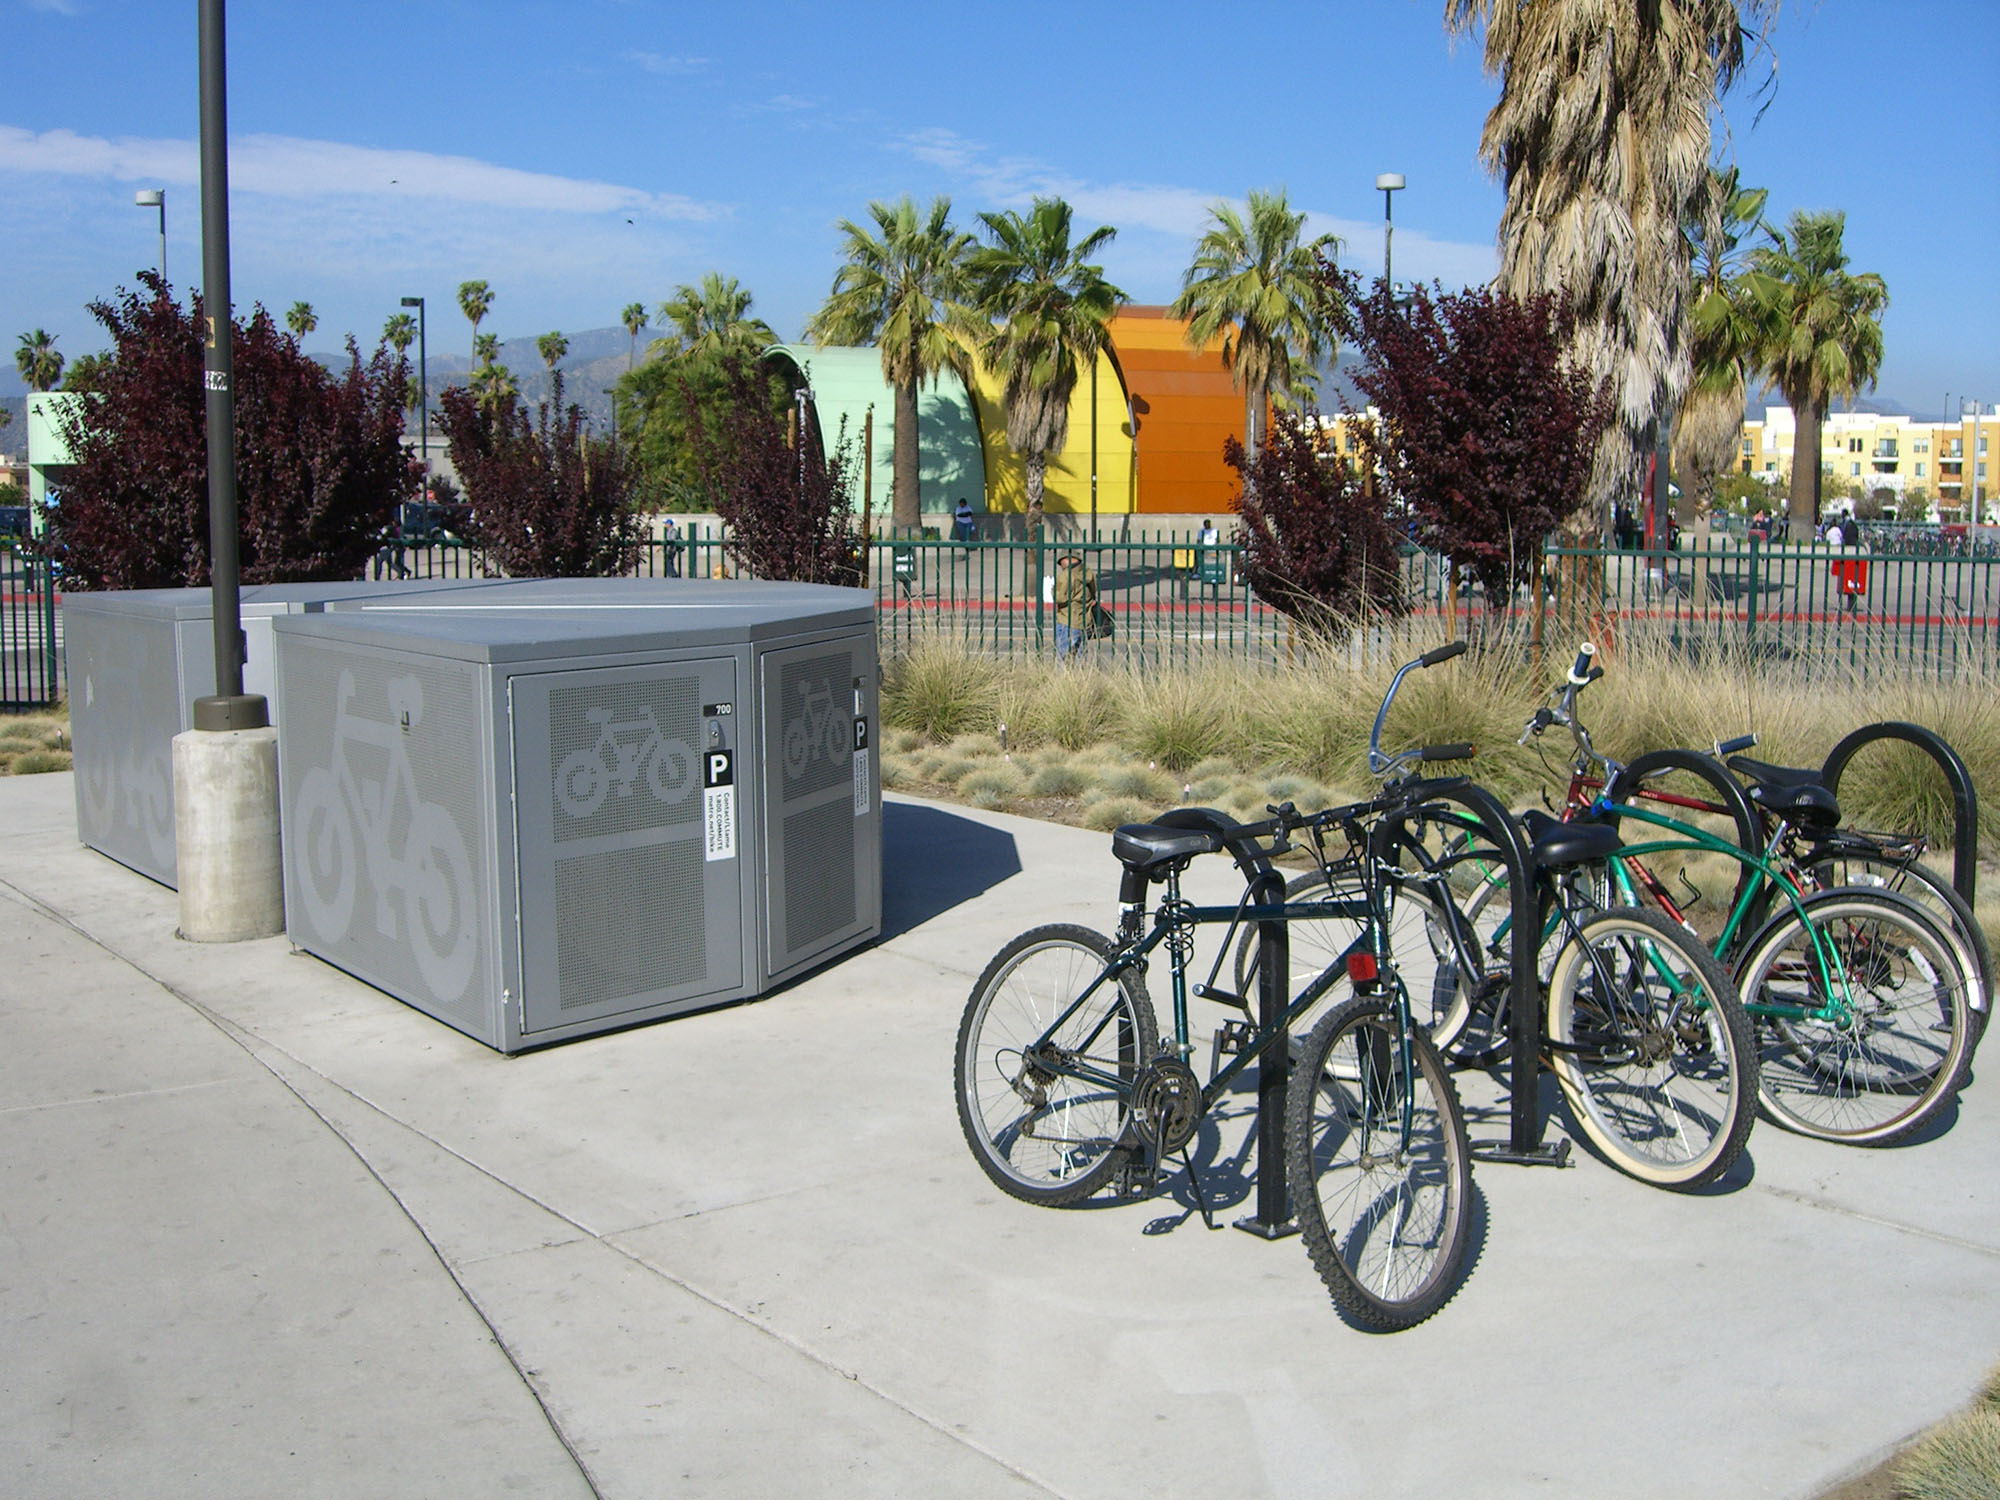 Fig. 31.31 The Orange Line BRT in Los Angeles includes both bicycle lockers and standard bicycle racks for overflow and for those unwilling to pay.